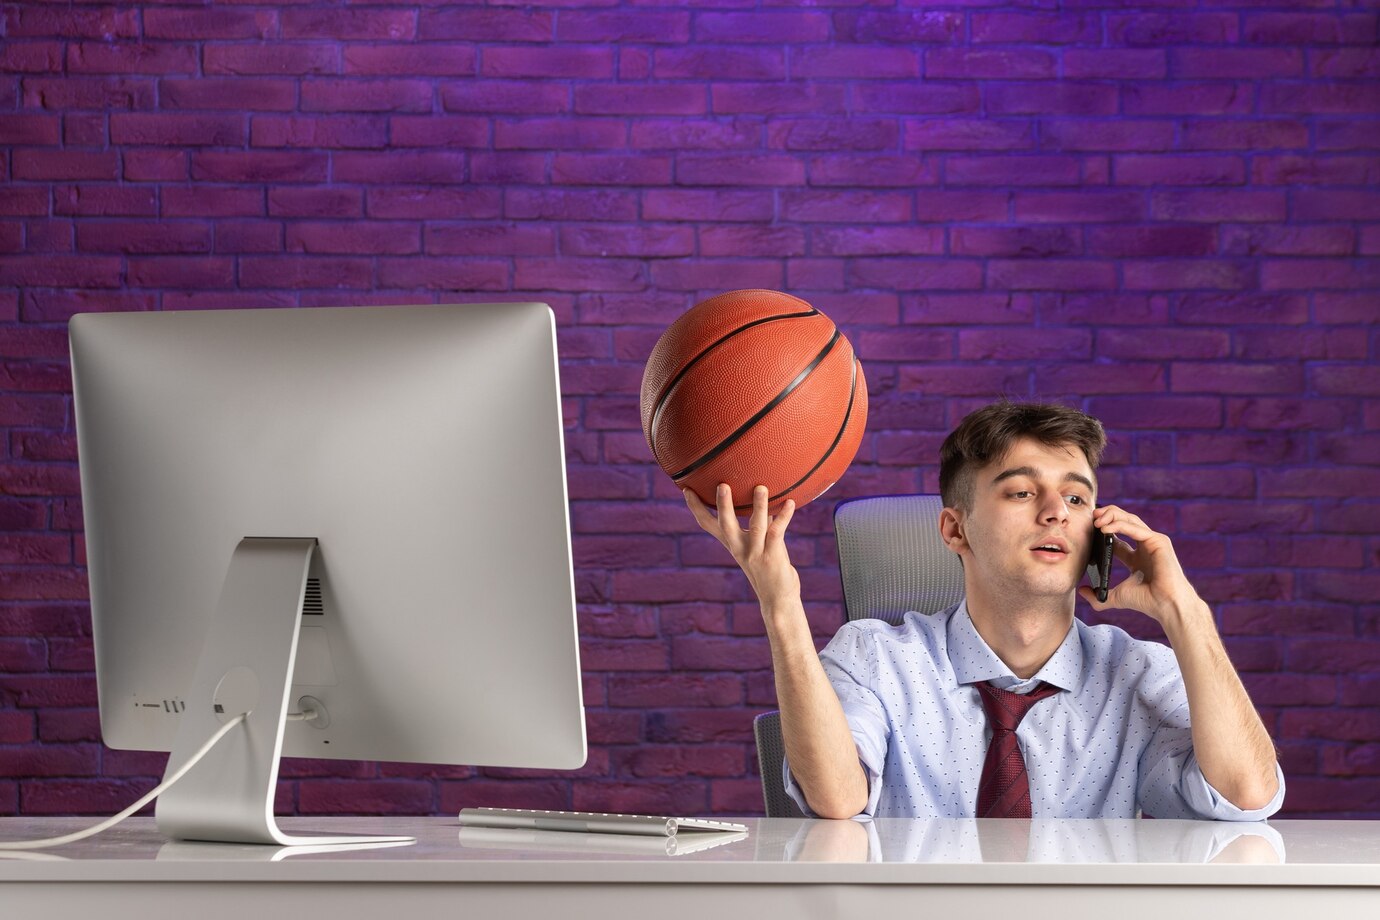 Betting on Basketball Tournaments: Focus on Game Tactics